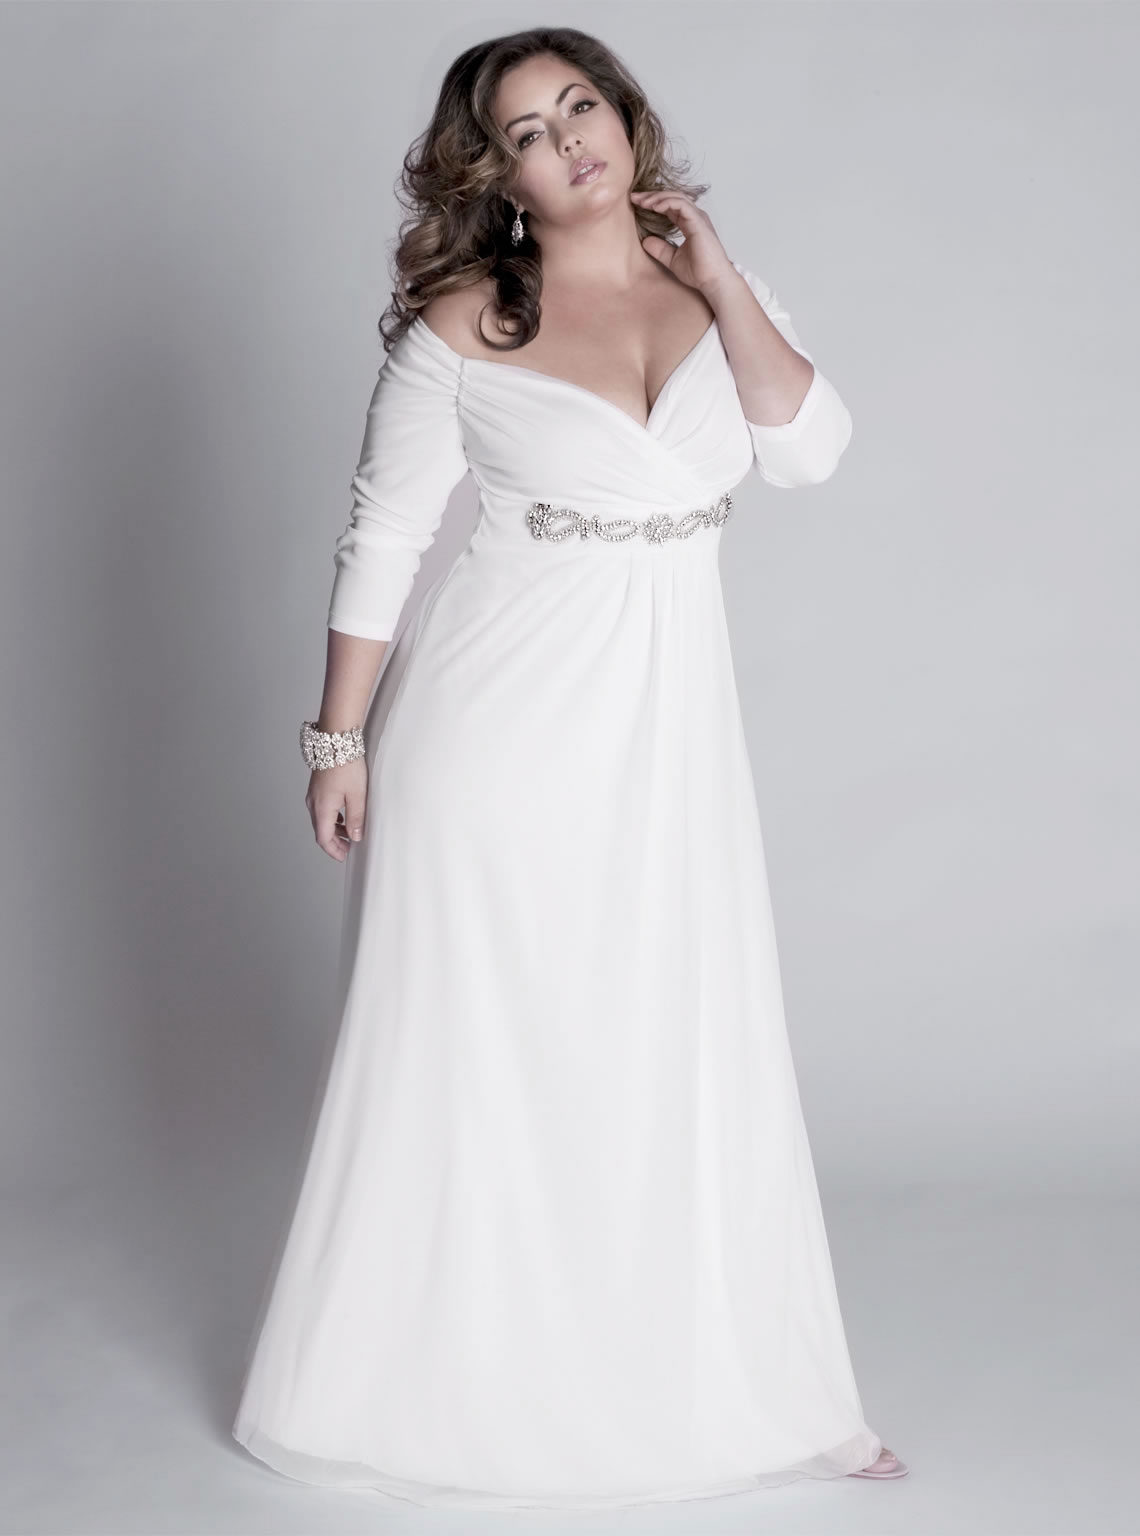 Lace Ball Gown Wedding Dresses For Plus Size Plus size formal dresses